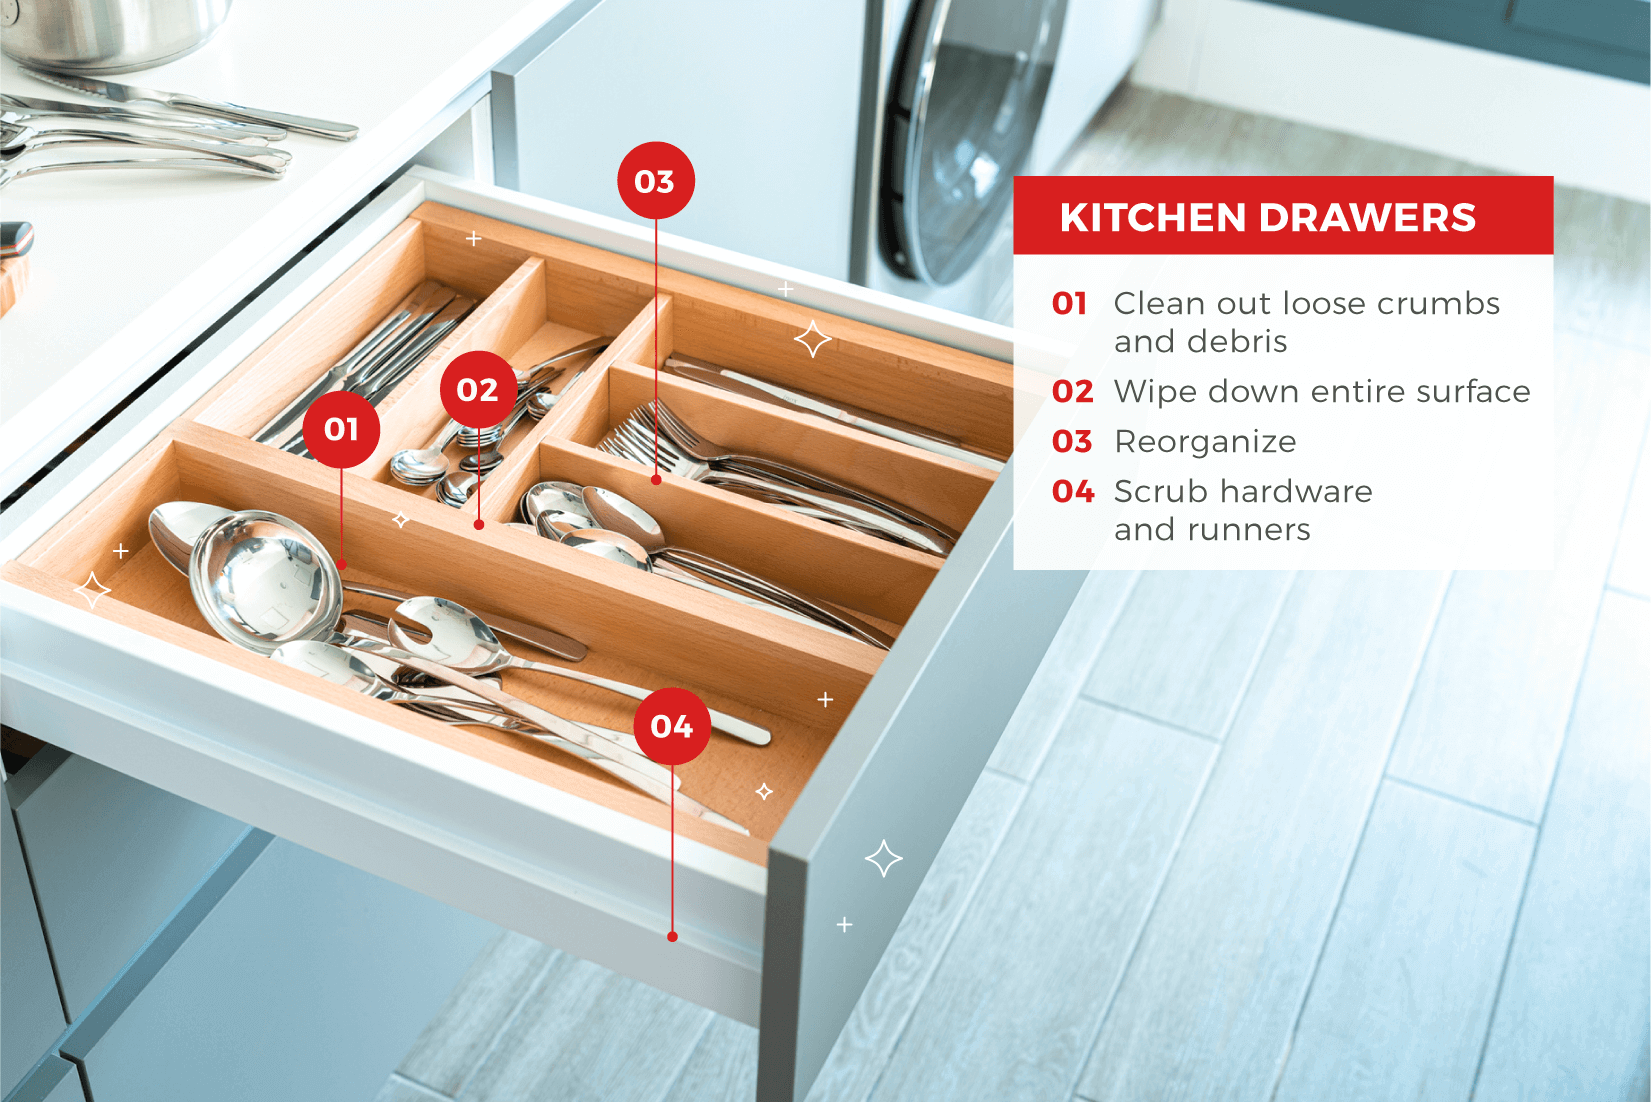 Open kitchen drawer with written instructions on how to clean each labeled part